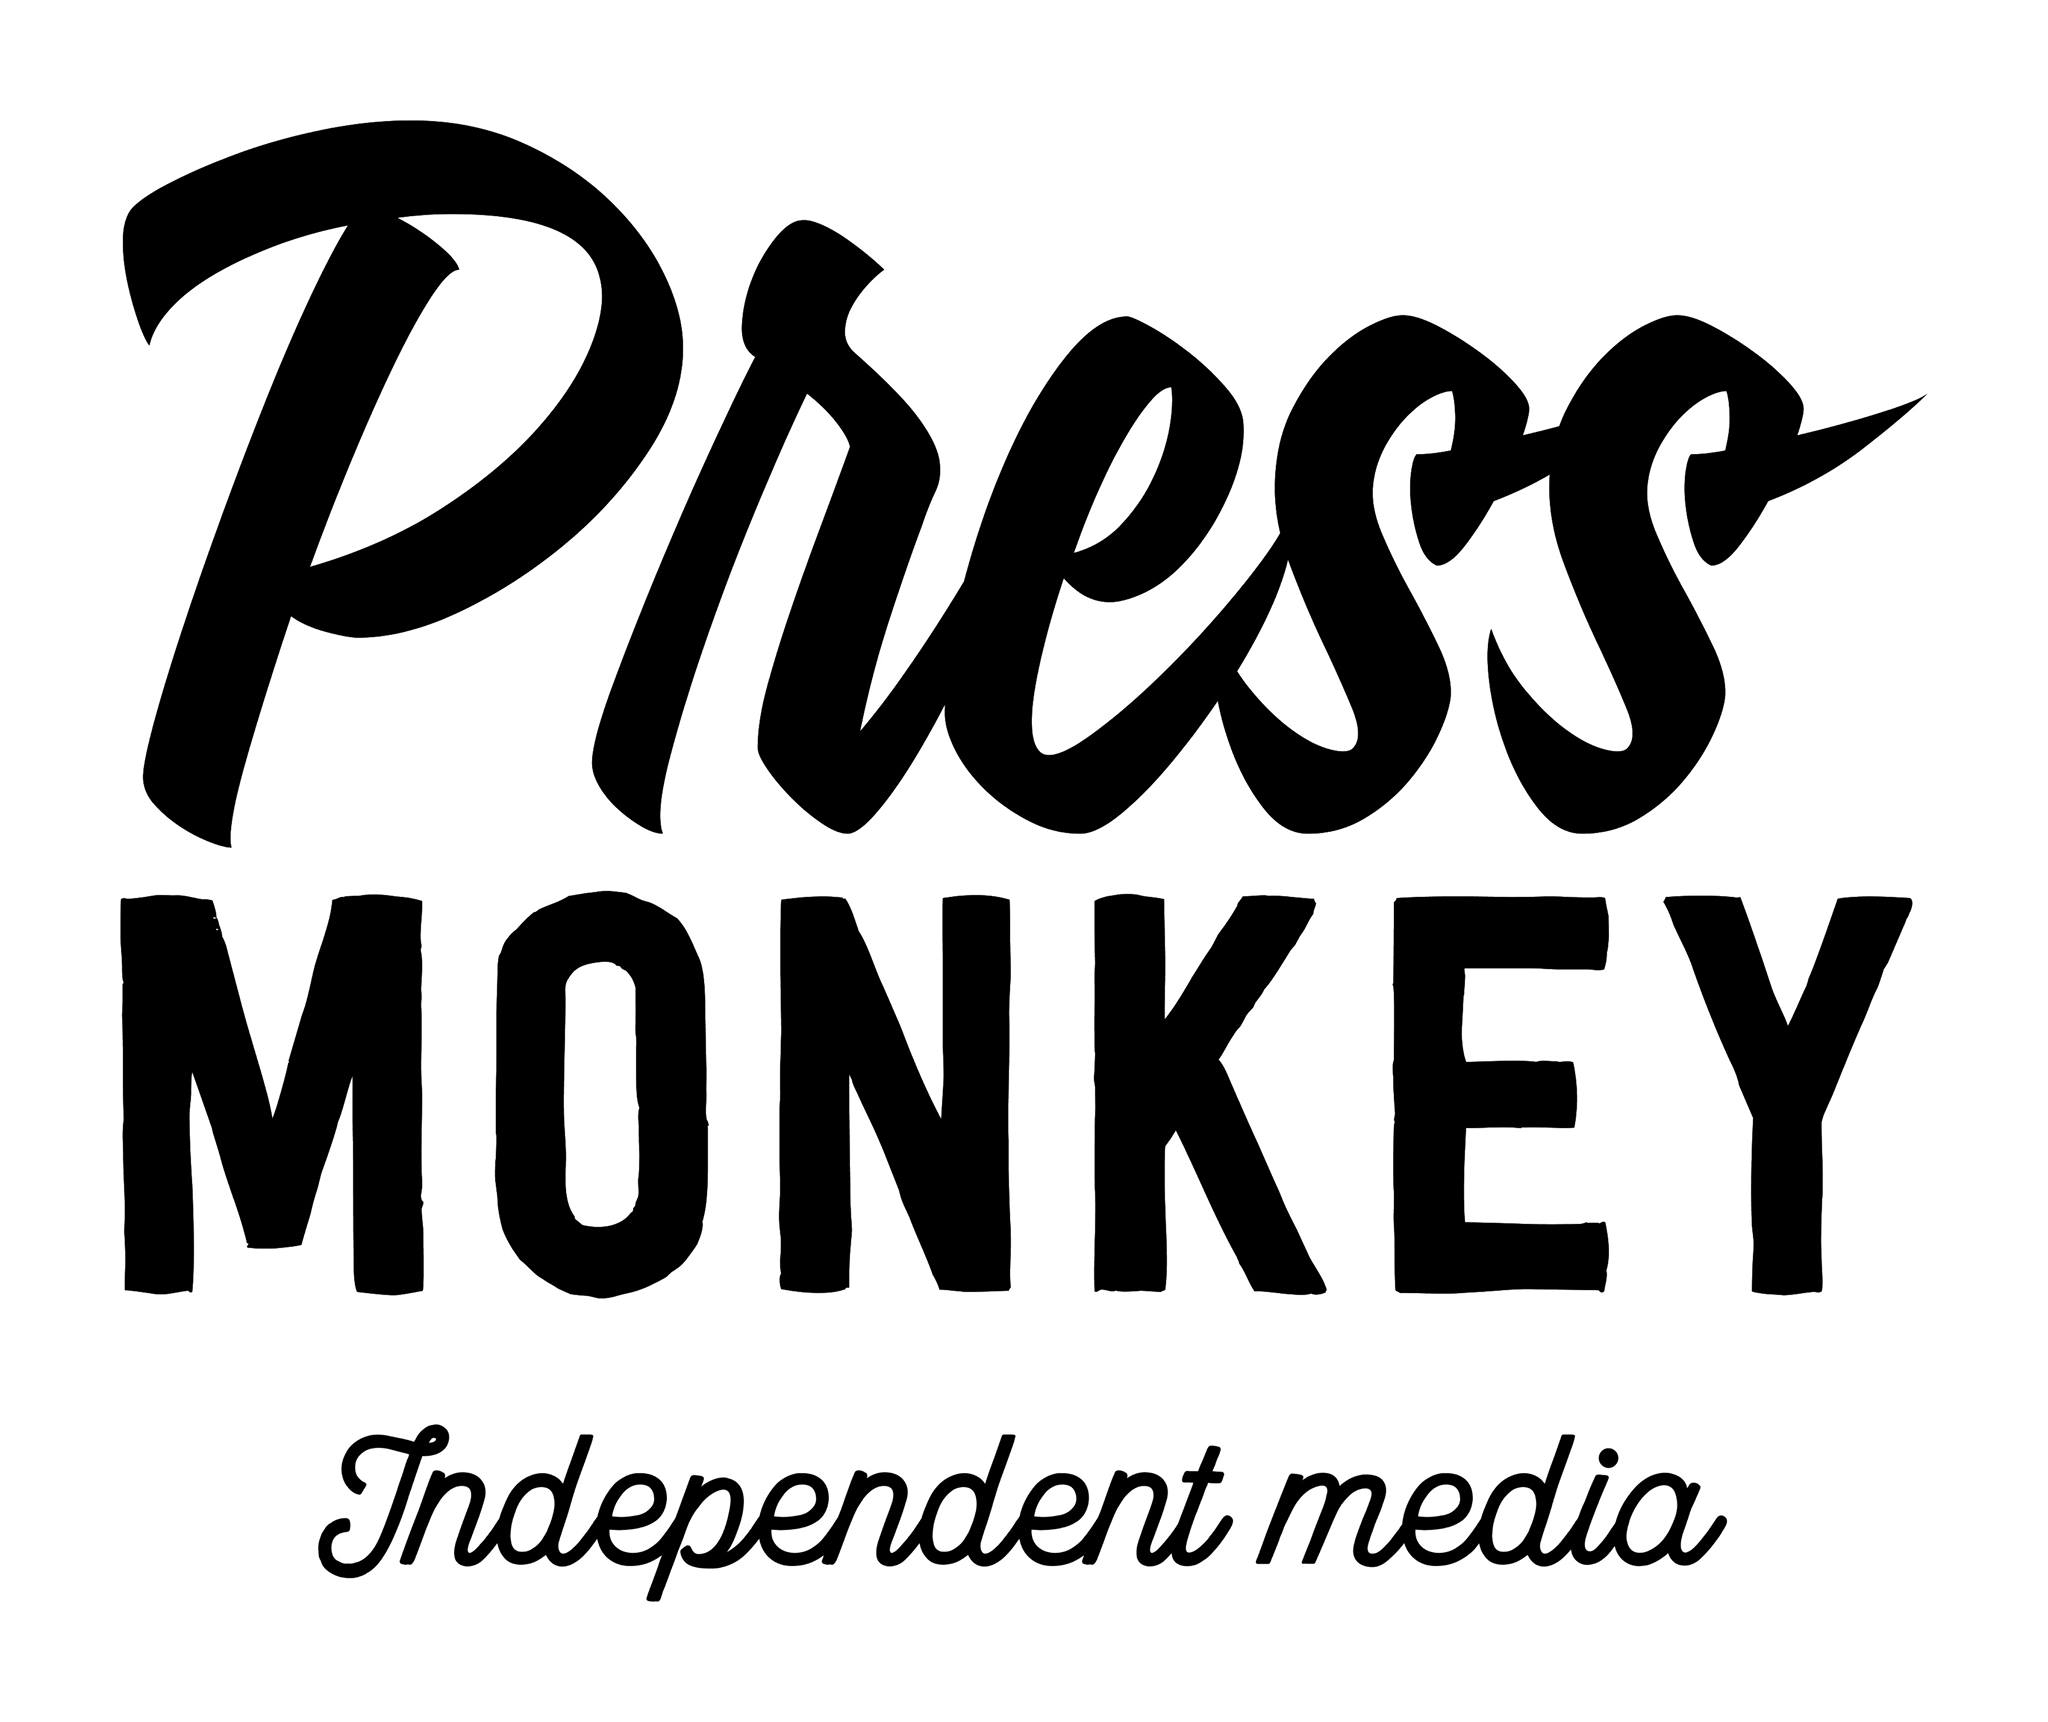 Press Monkey Live on Facebook. Aspen and Income Inequality.